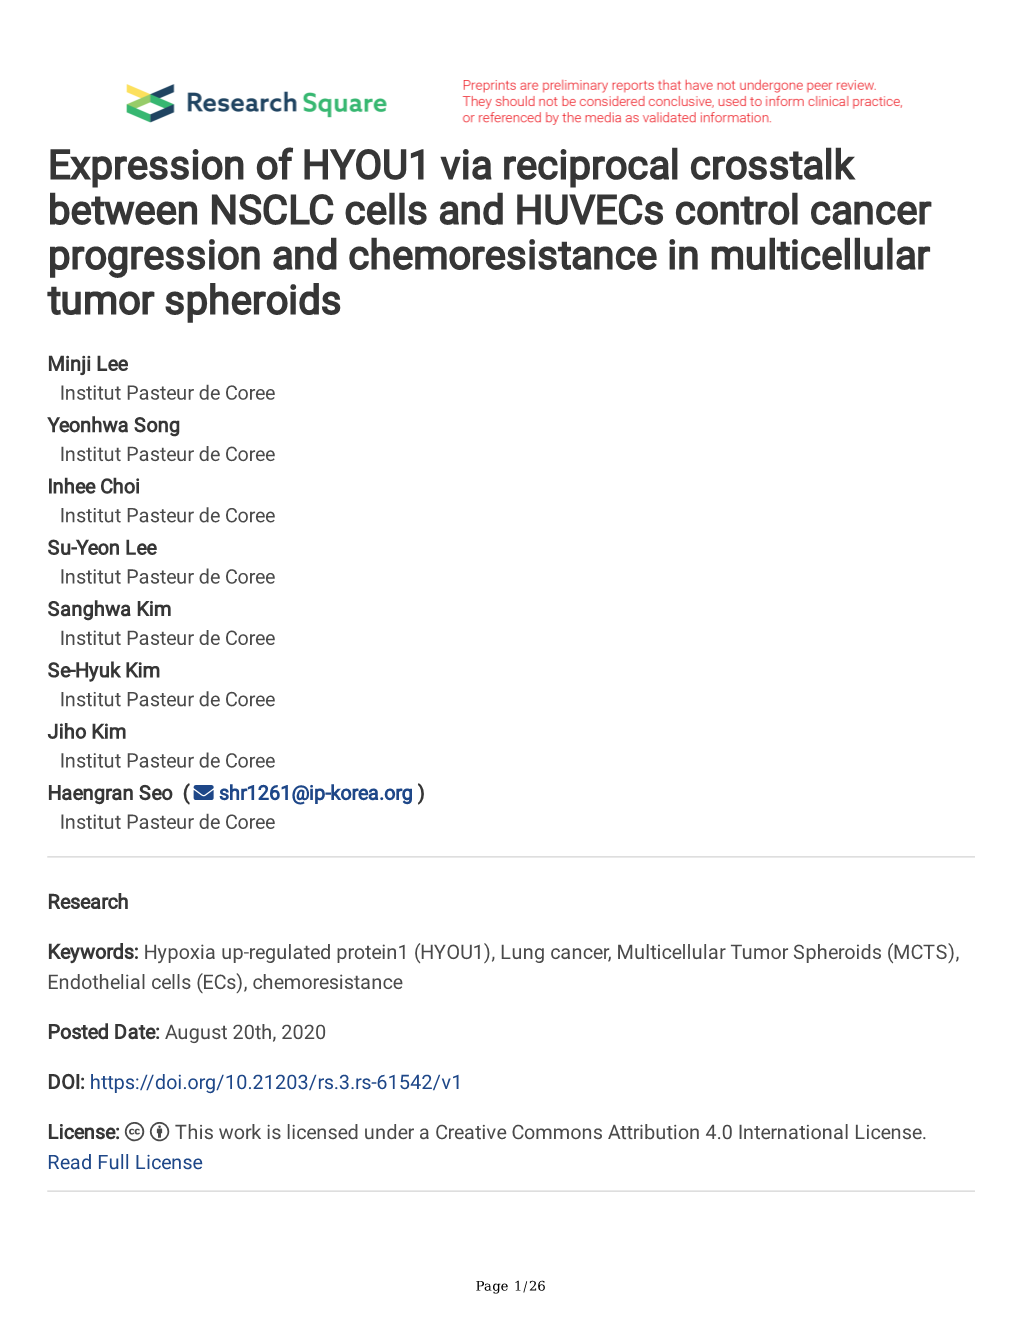 Expression of HYOU1 Via Reciprocal Crosstalk Between NSCLC Cells and Huvecs Control Cancer Progression and Chemoresistance in Multicellular Tumor Spheroids